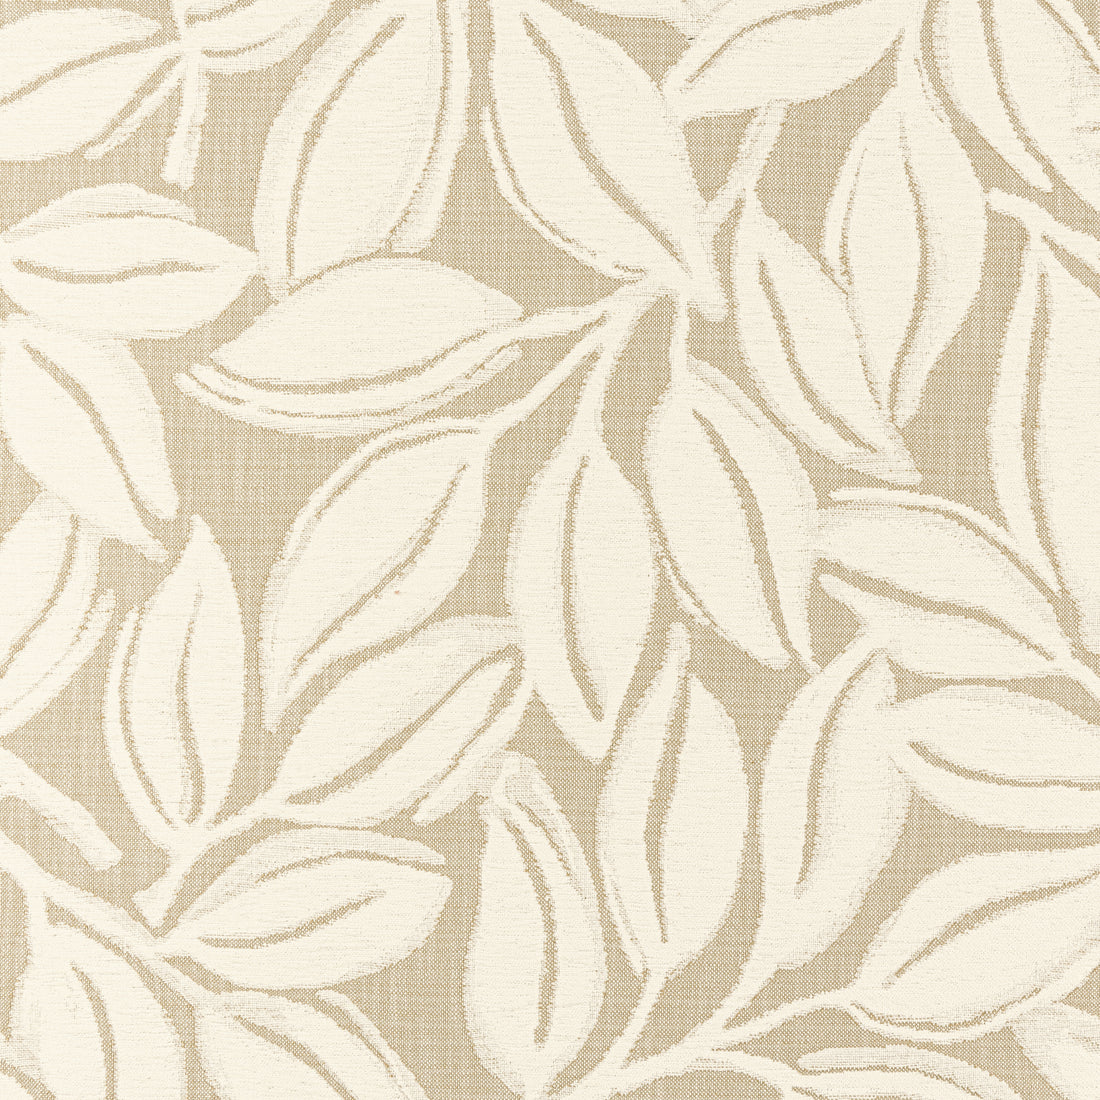 Kona fabric in caramel color - pattern number W8809 - by Thibaut in the Haven collection